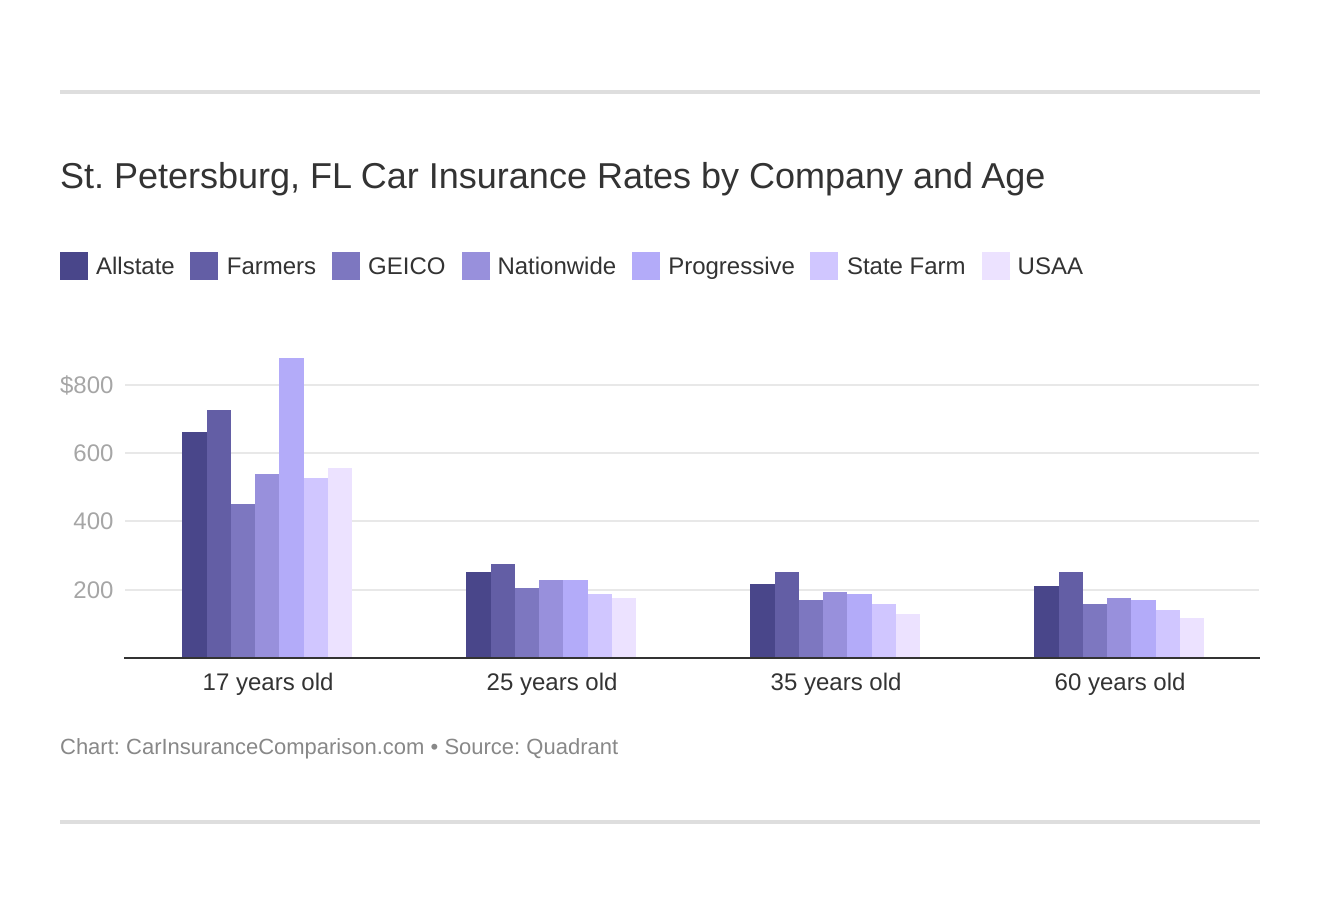 St. Petersburg, FL Car Insurance Rates by Company and Age